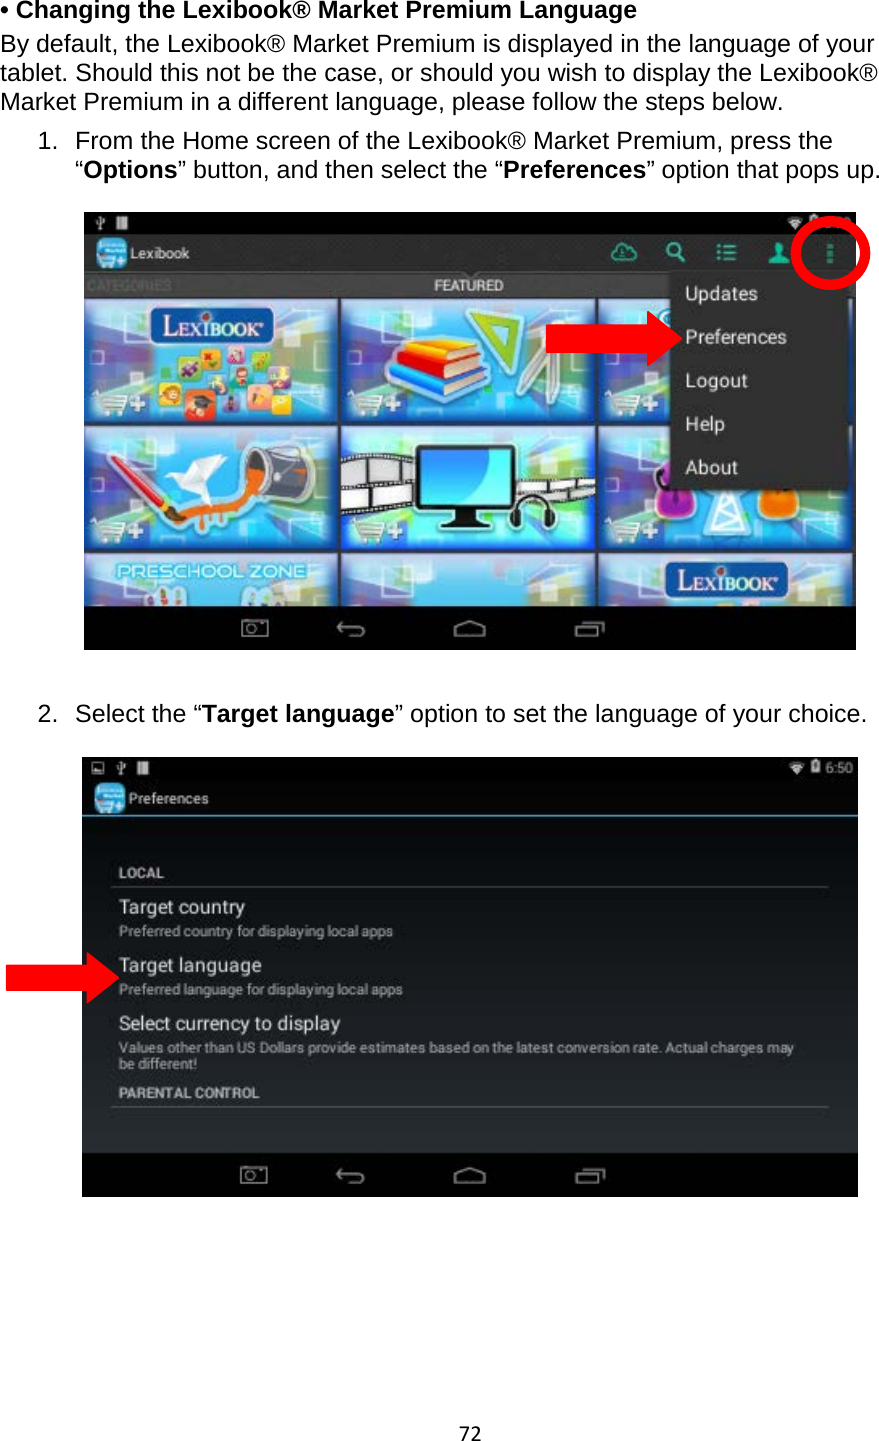 72  • Changing the Lexibook® Market Premium Language  By default, the Lexibook® Market Premium is displayed in the language of your tablet. Should this not be the case, or should you wish to display the Lexibook® Market Premium in a different language, please follow the steps below. 1. From the Home screen of the Lexibook® Market Premium, press the “Options” button, and then select the “Preferences” option that pops up.     2. Select the “Target language” option to set the language of your choice.         